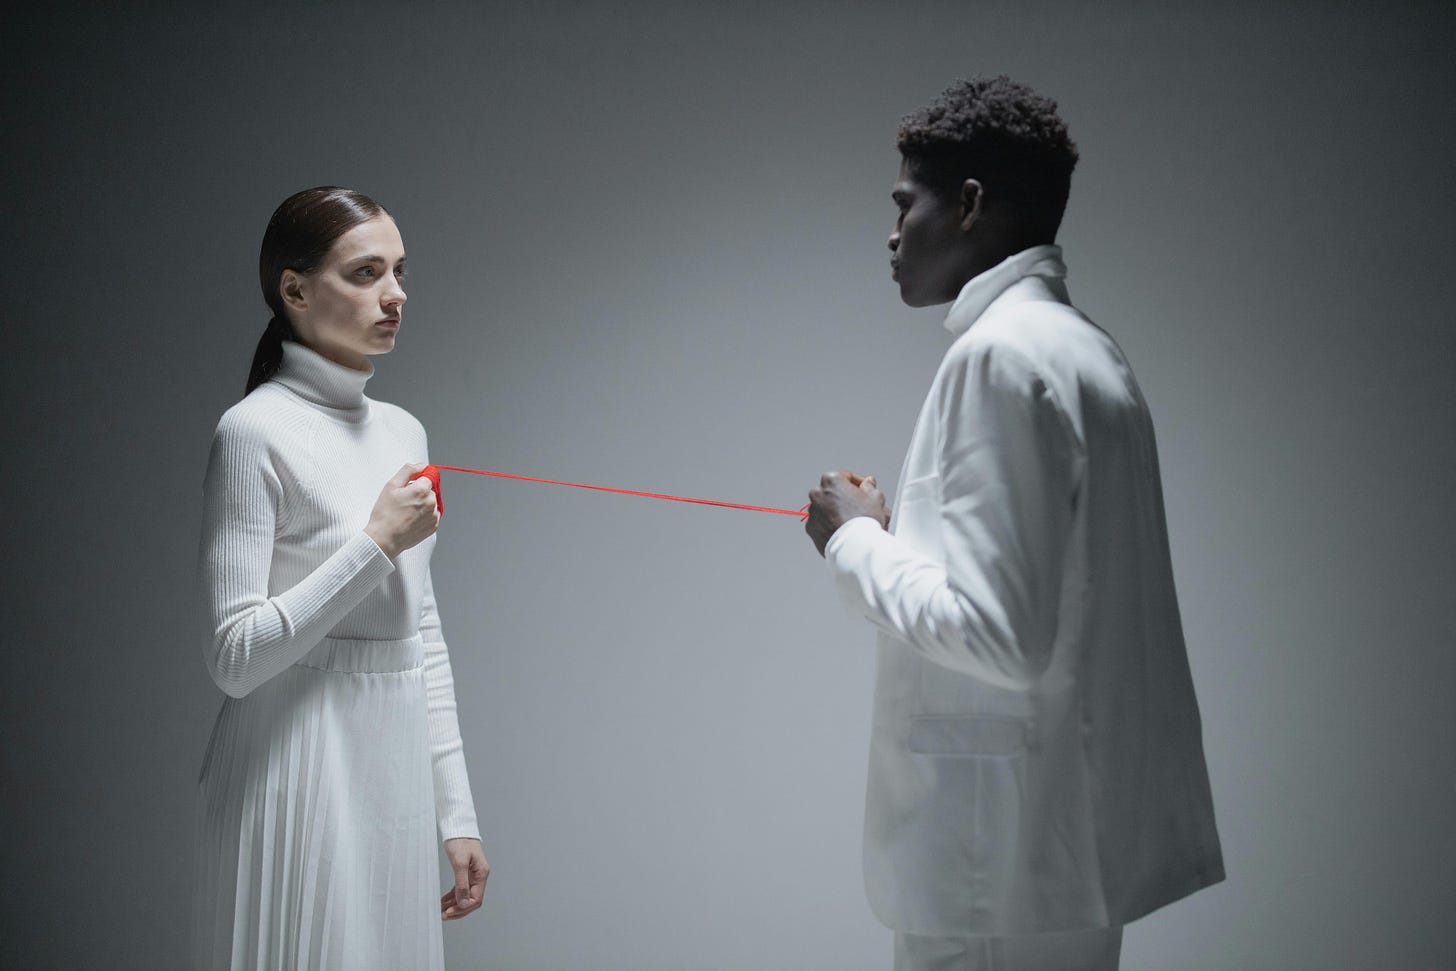 Photo of white woman and black man wearing white clothes facing each other without smiling while holding a red threat between them at a distance of about 4 feet.